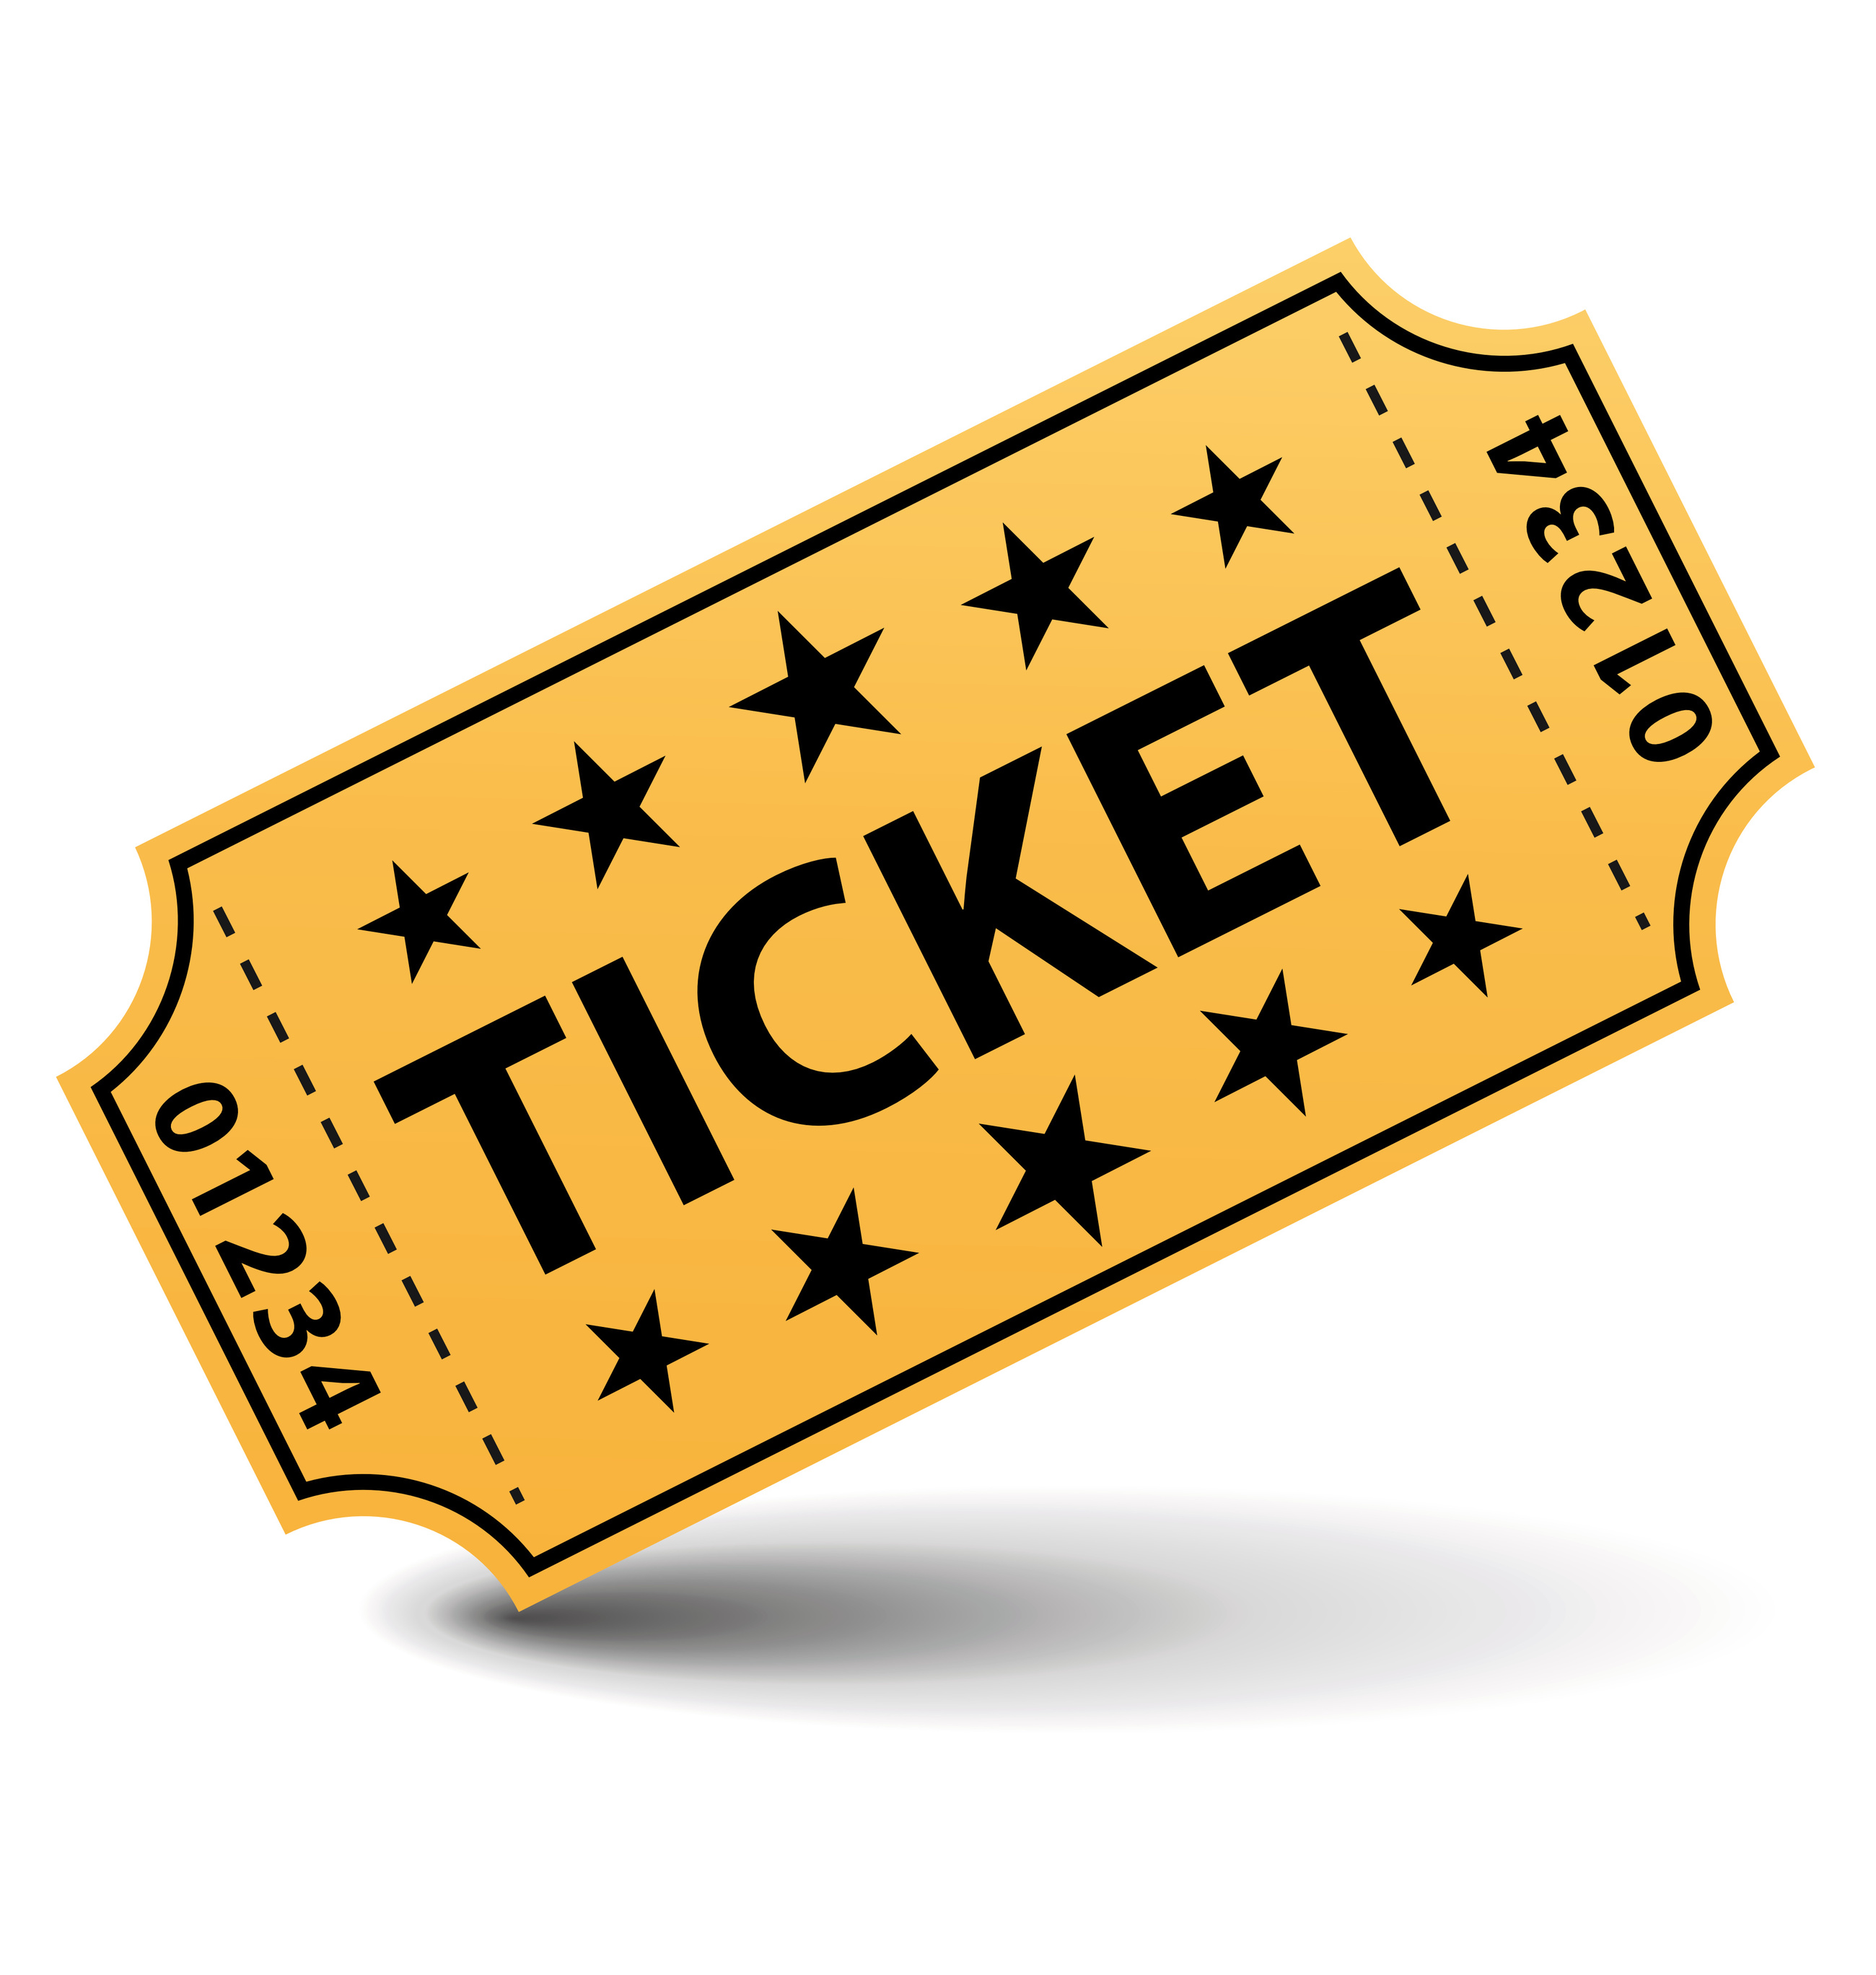 Ticket clipart 2